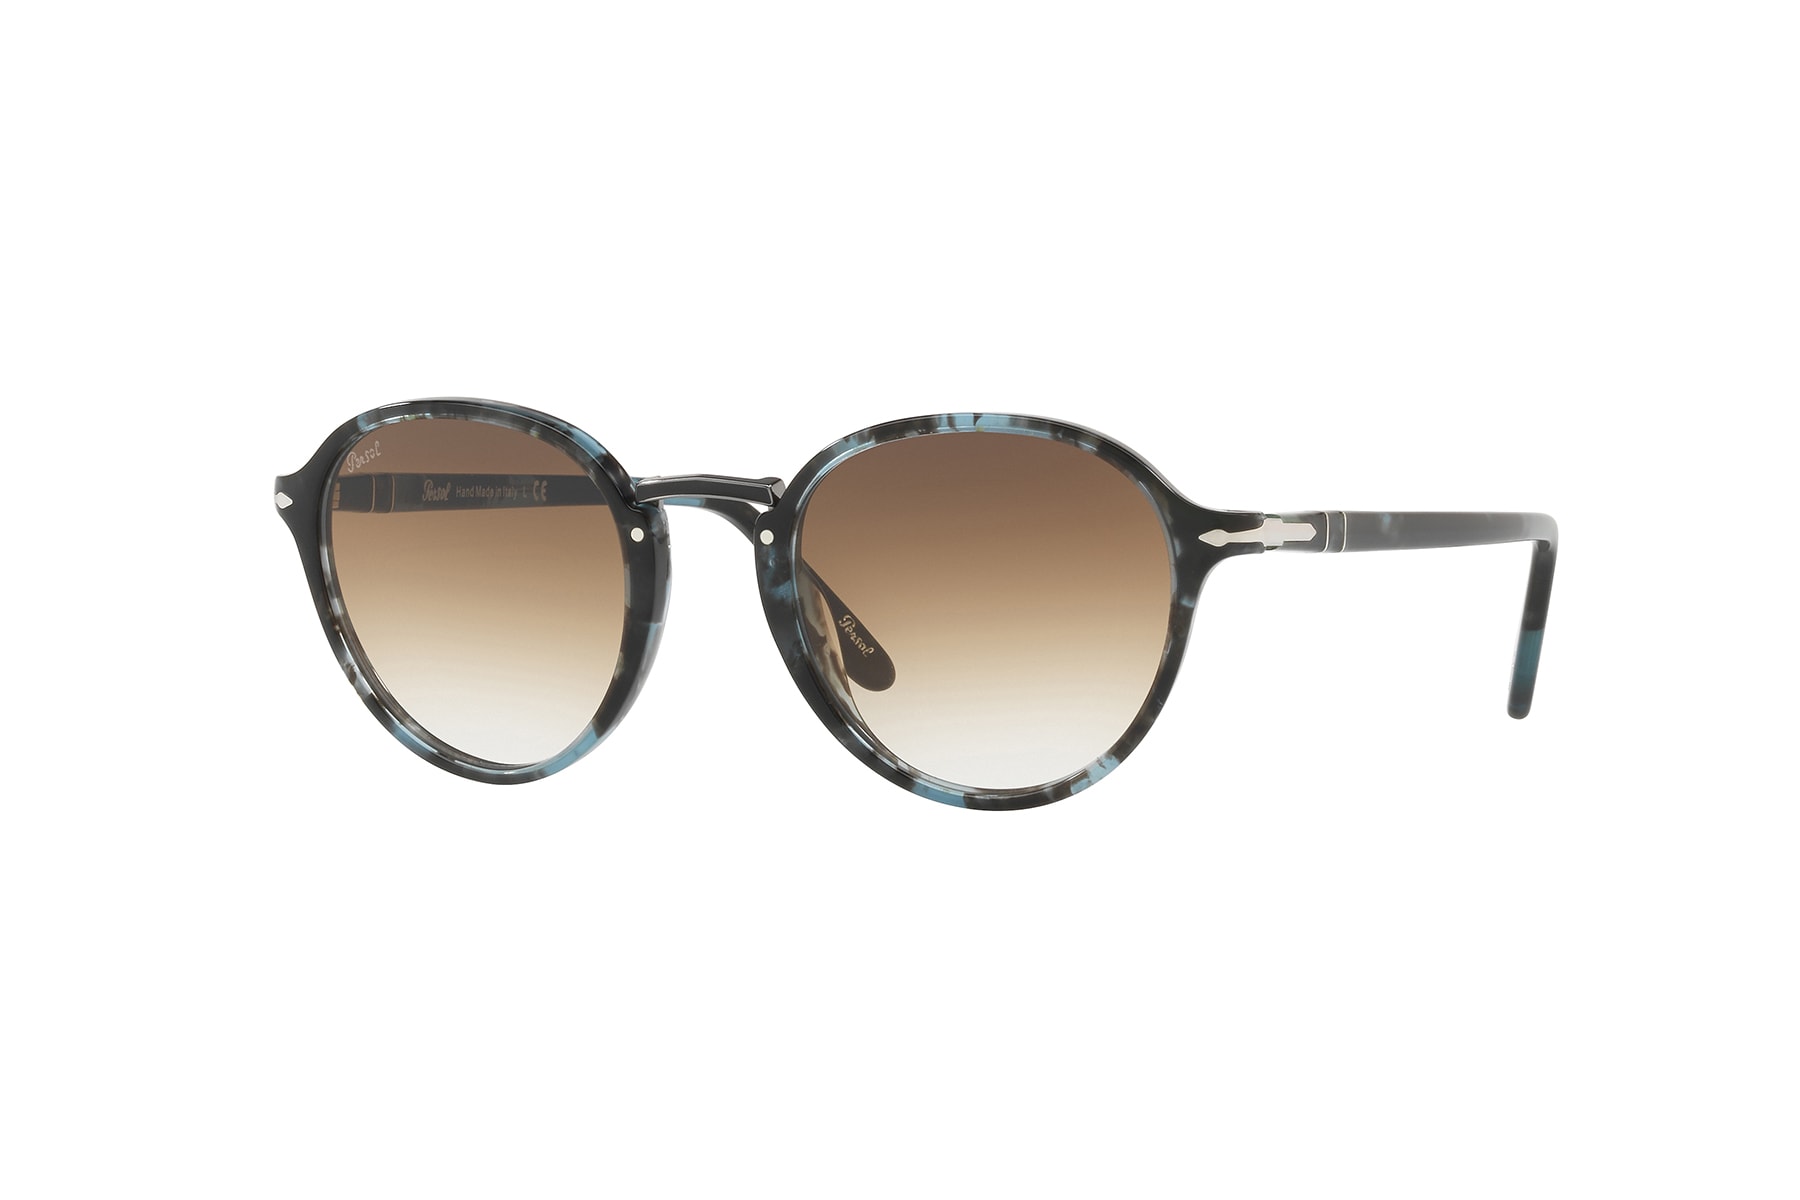 Persol "Good Point, Well Made" Collection